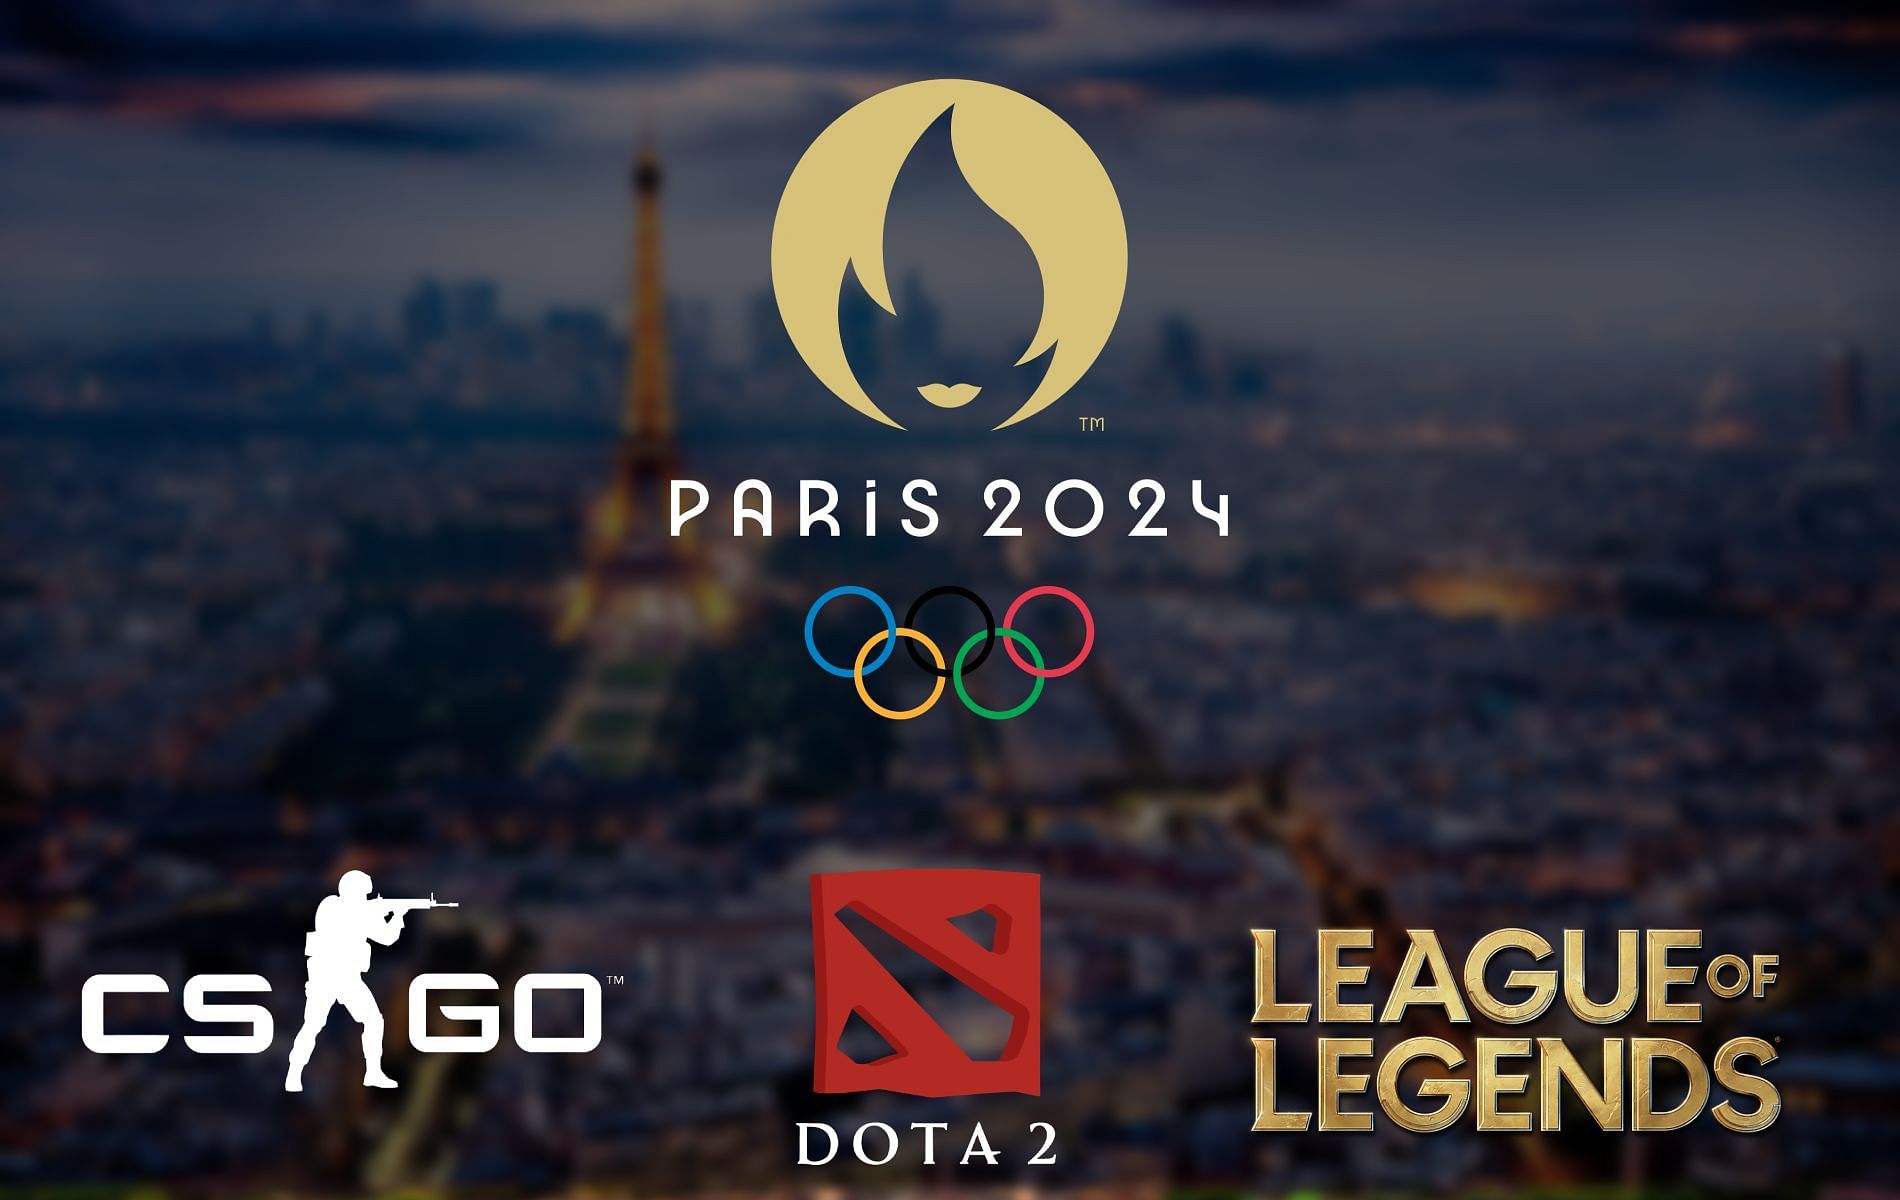 CS:GO, Dota 2 and LoL Worlds might be included in 2024 Paris Olympics